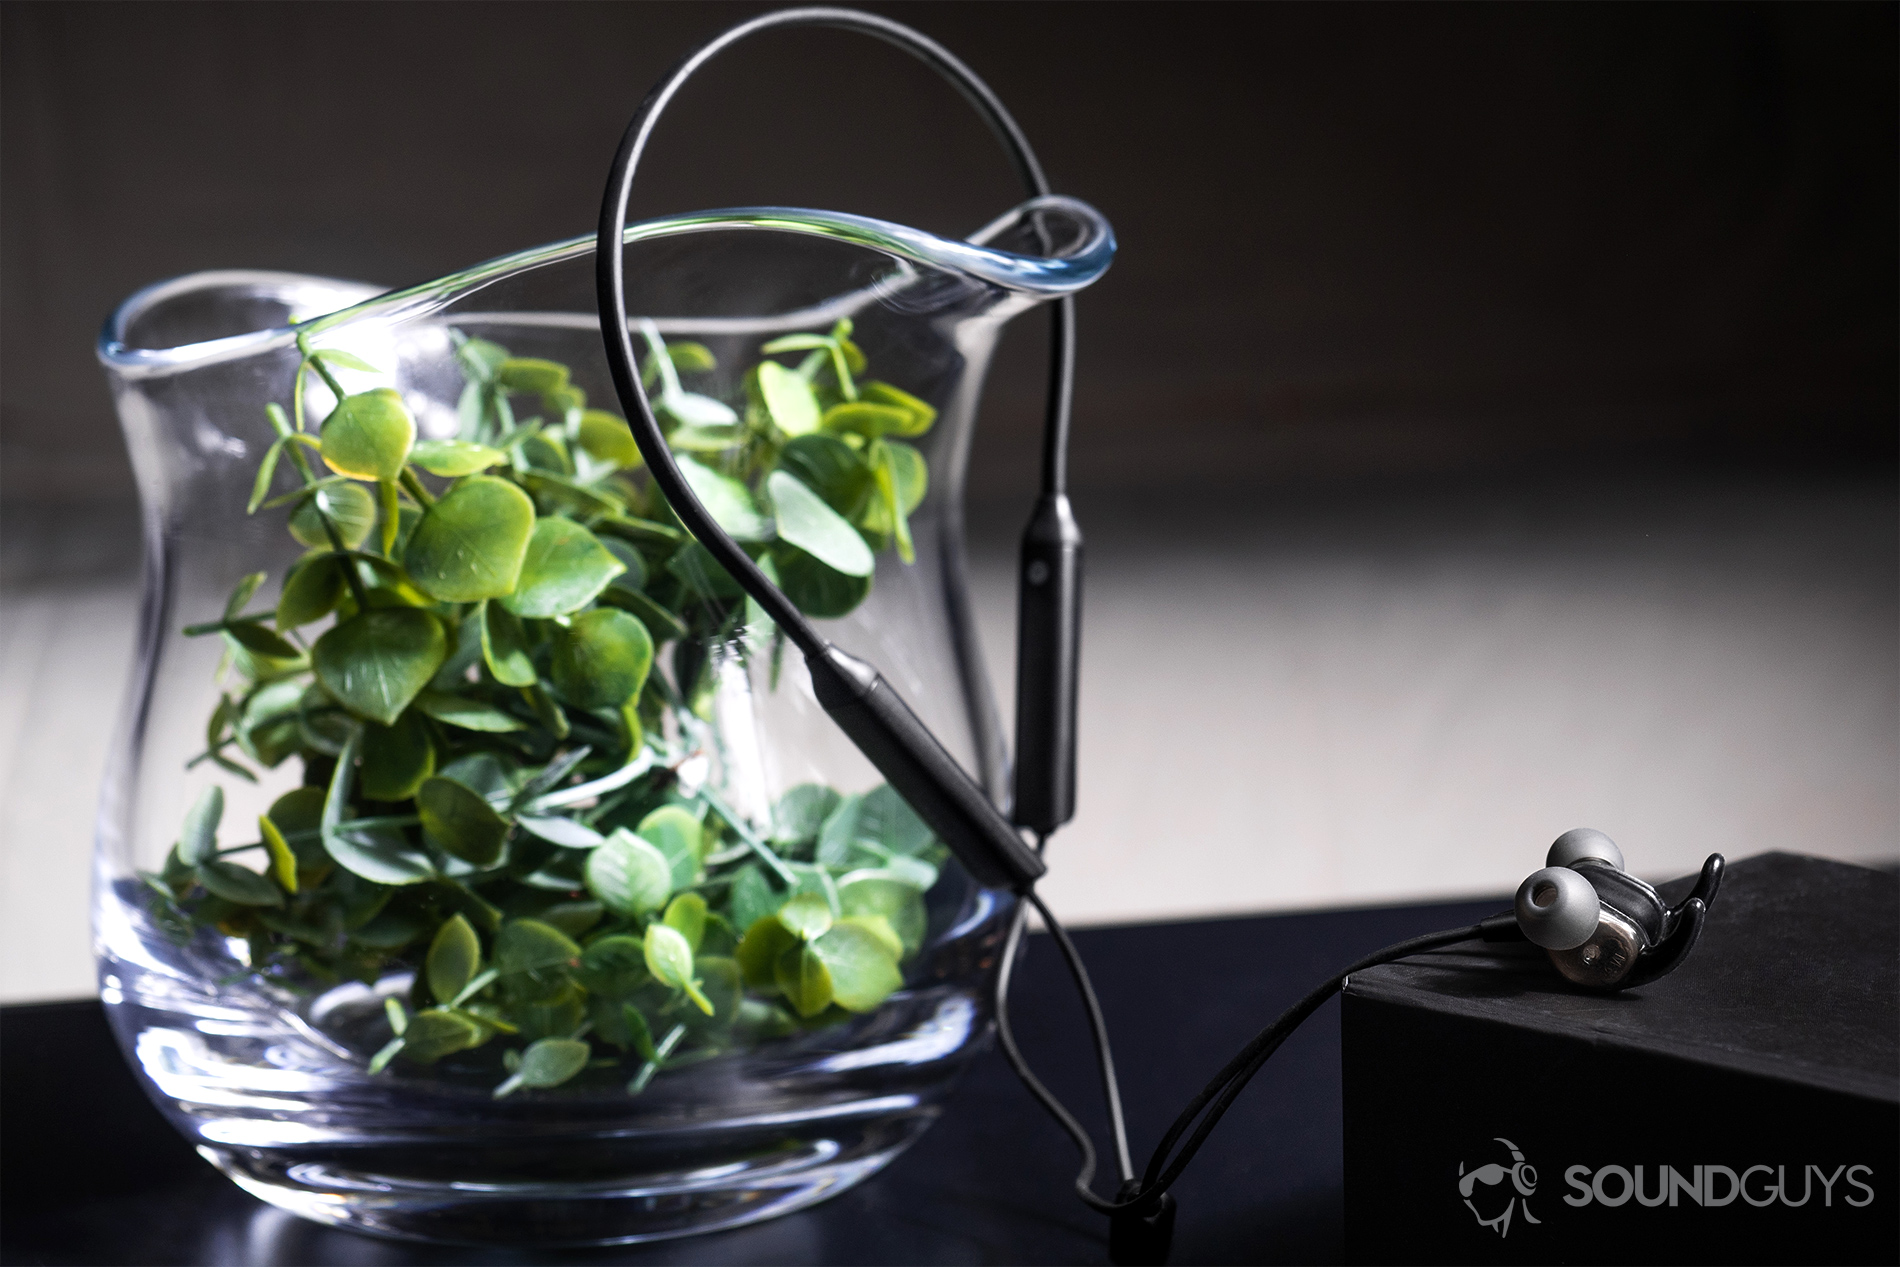 SoundPeats Engine: The neckband suspended from a large glass vase filled with artificial greenery and the earbud housings atop a black box.